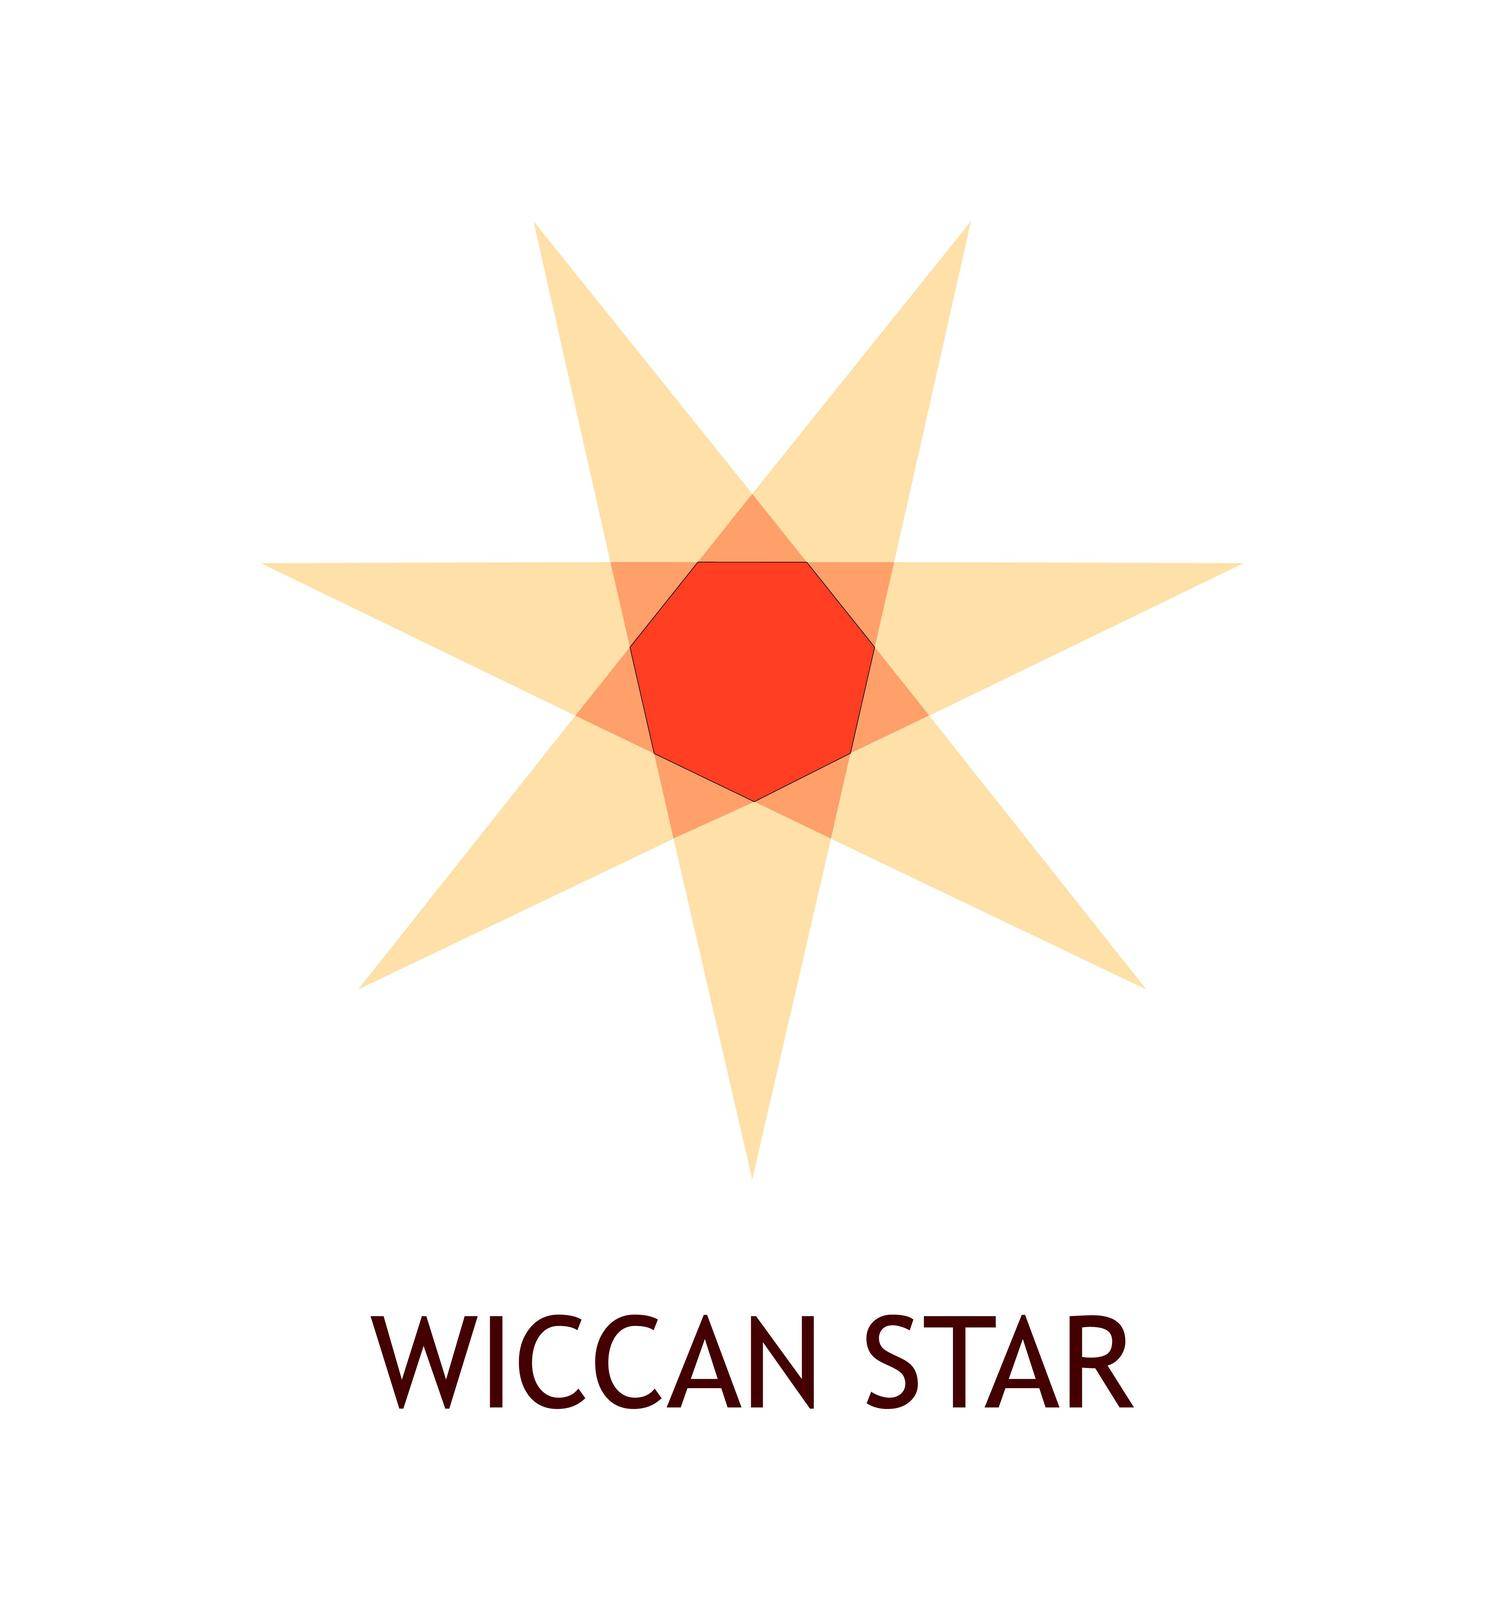 Wiccan star, pagan symbol - Vector emblem in fire warm colors isolated on white.